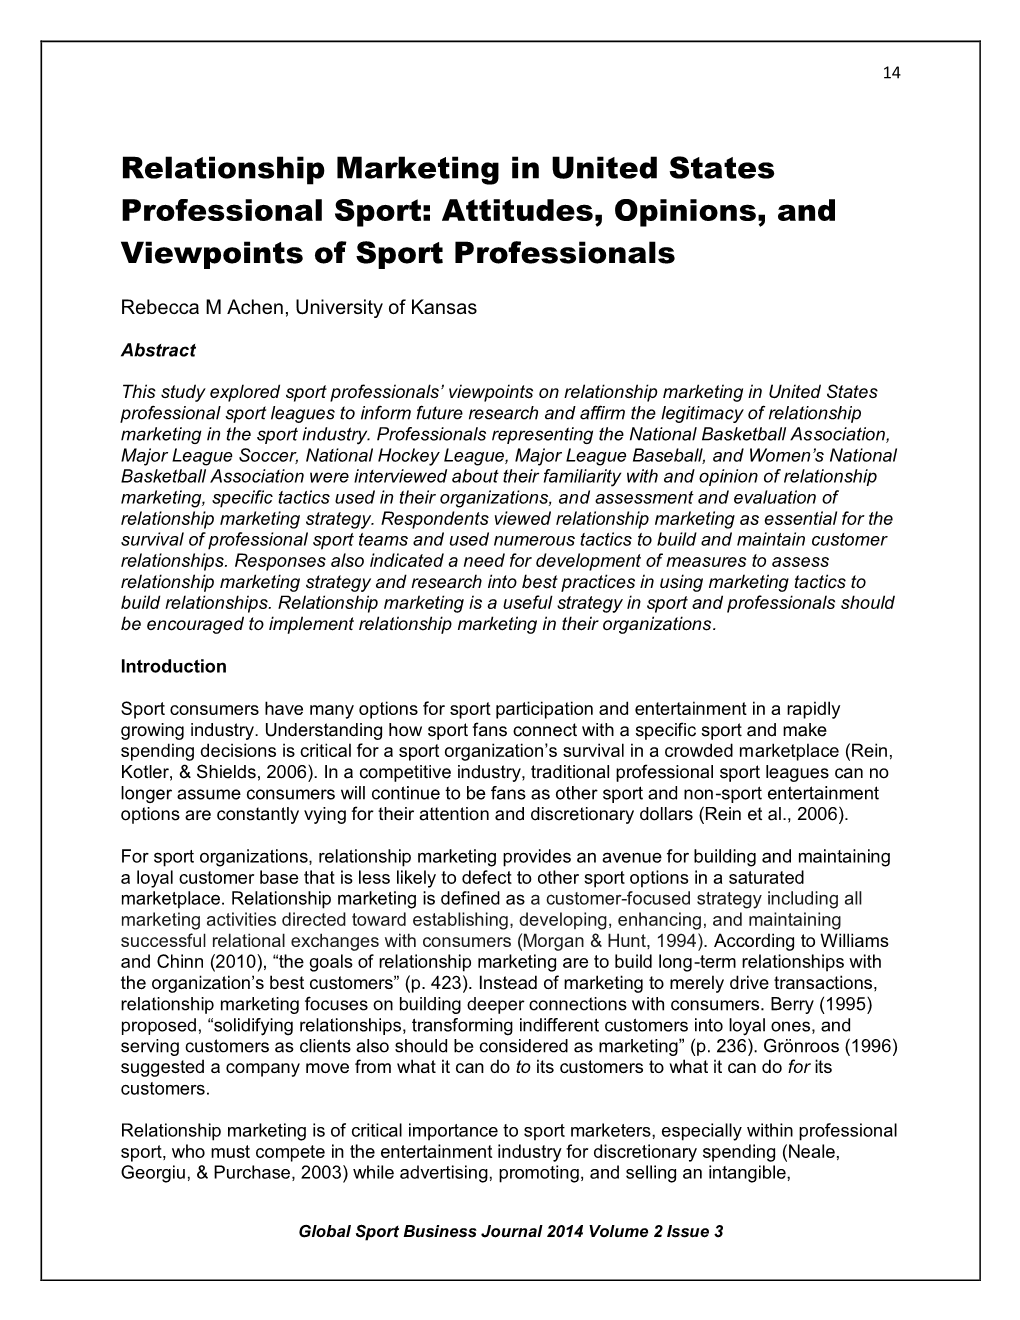 Relationship Marketing in United States Professional Sport: Attitudes, Opinions, and Viewpoints of Sport Professionals